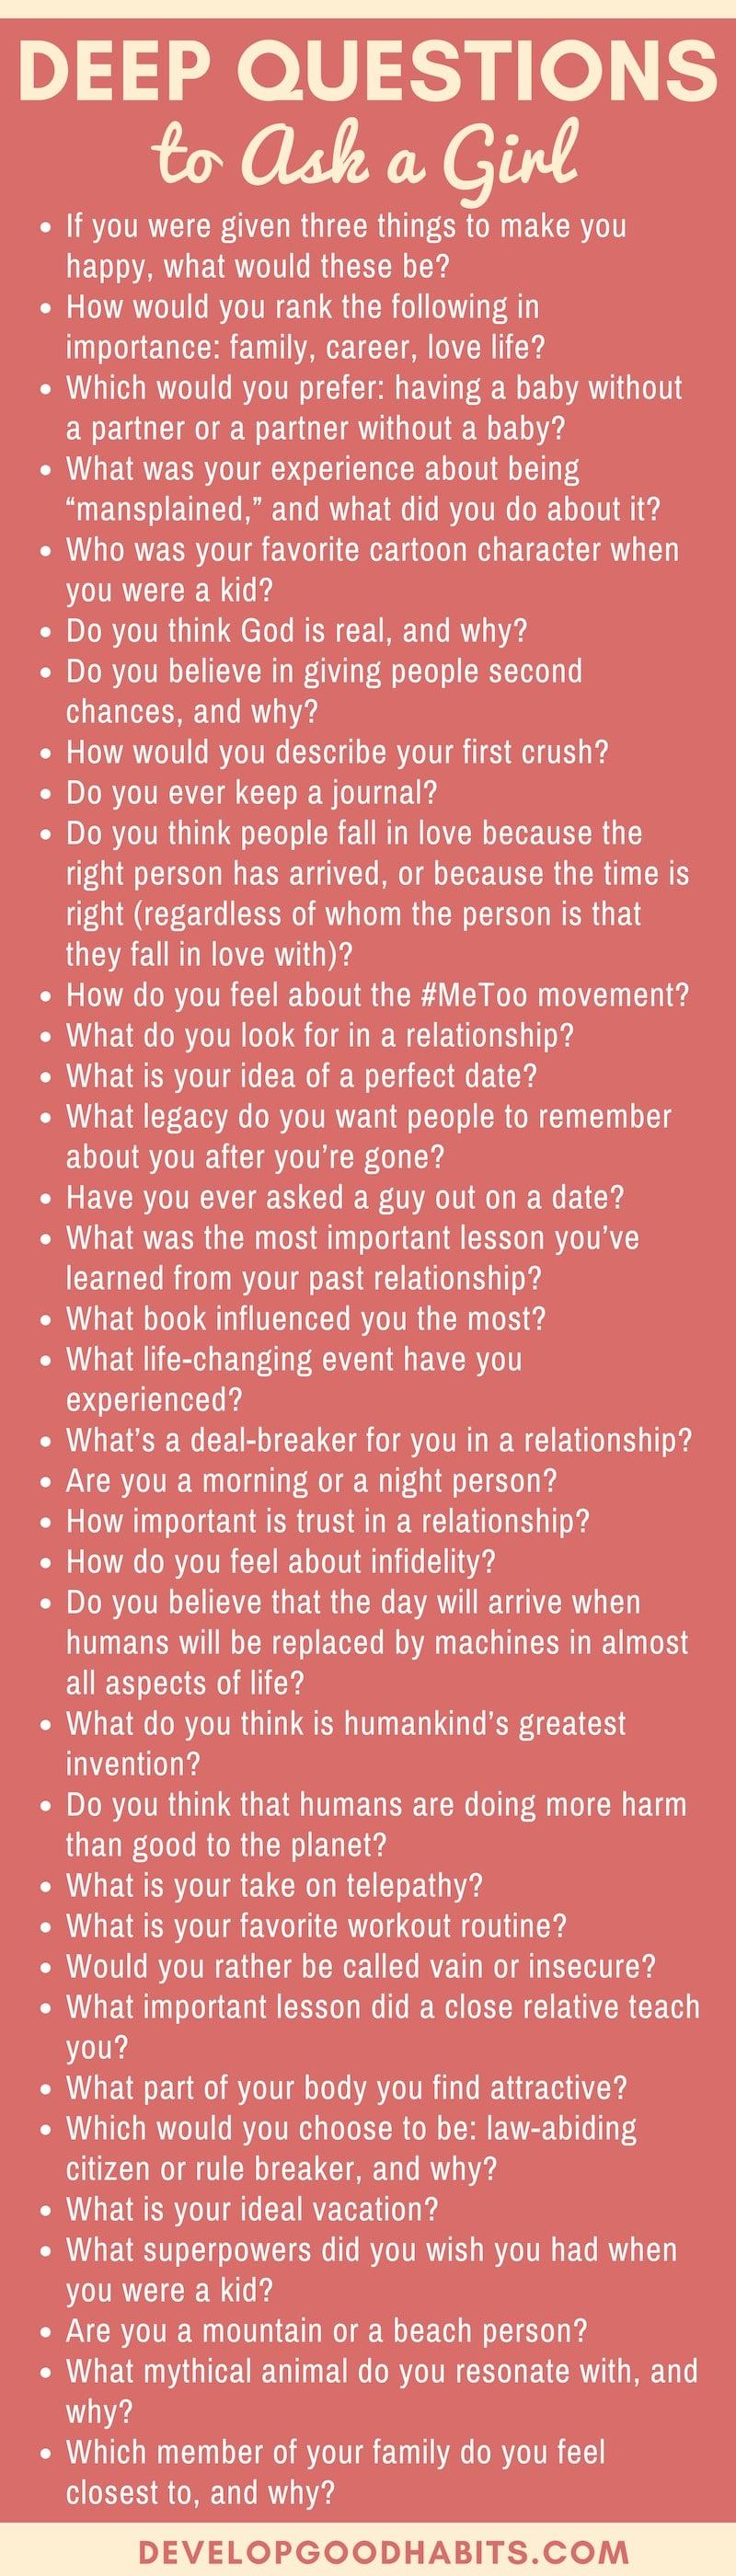 Top questions to ask a woman